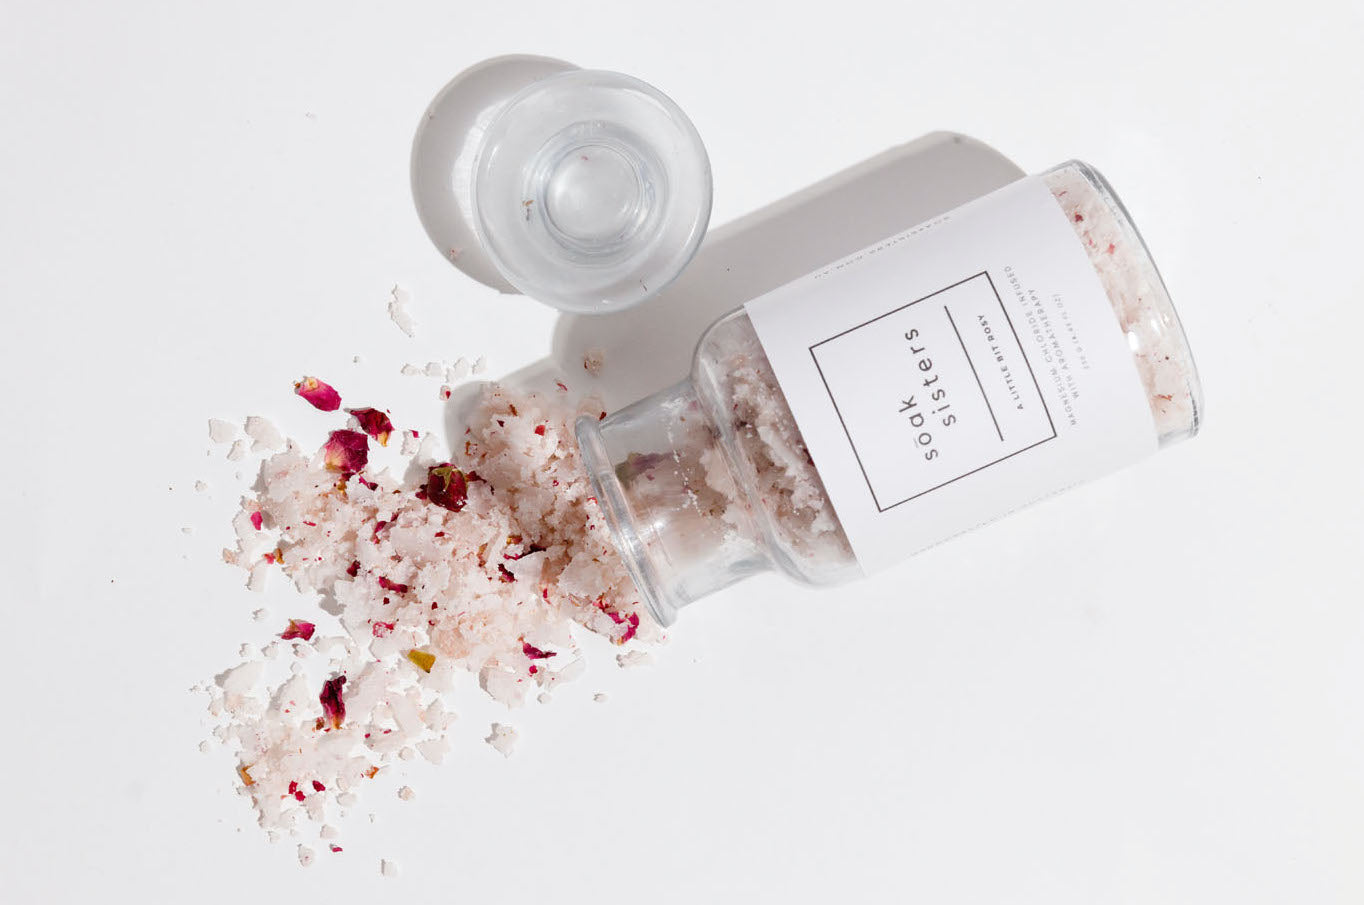 A bottle of bath salts laying on its side with the lid off. Some of the bath salts have spilled out of the bottle. The label on the bottle says "soak sisters"